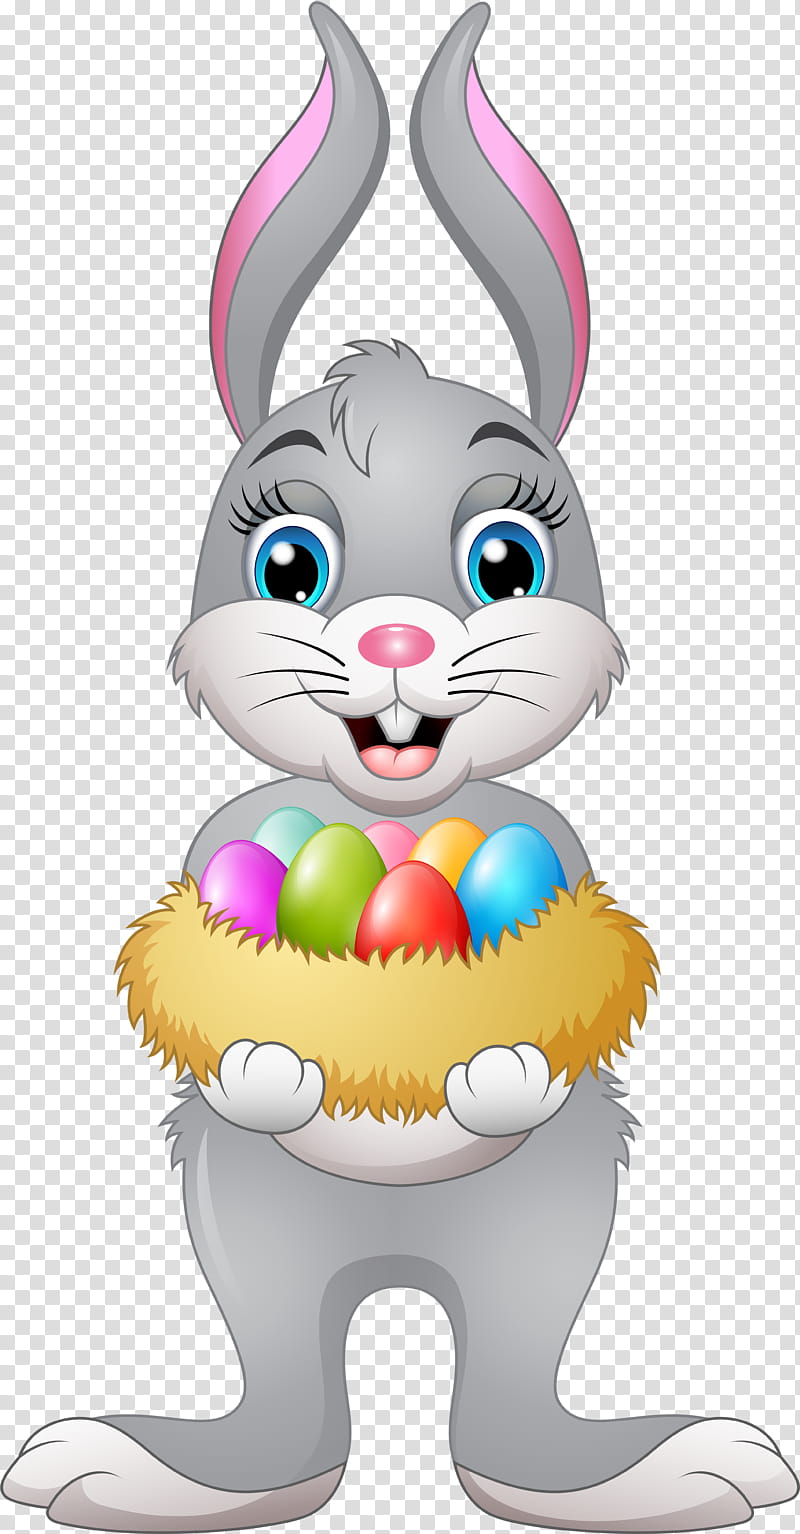 Easter Egg, Easter Bunny, Rabbit, Easter
, Hare, Easter Bunny Baby, Cartoon, Drawing transparent background PNG clipart